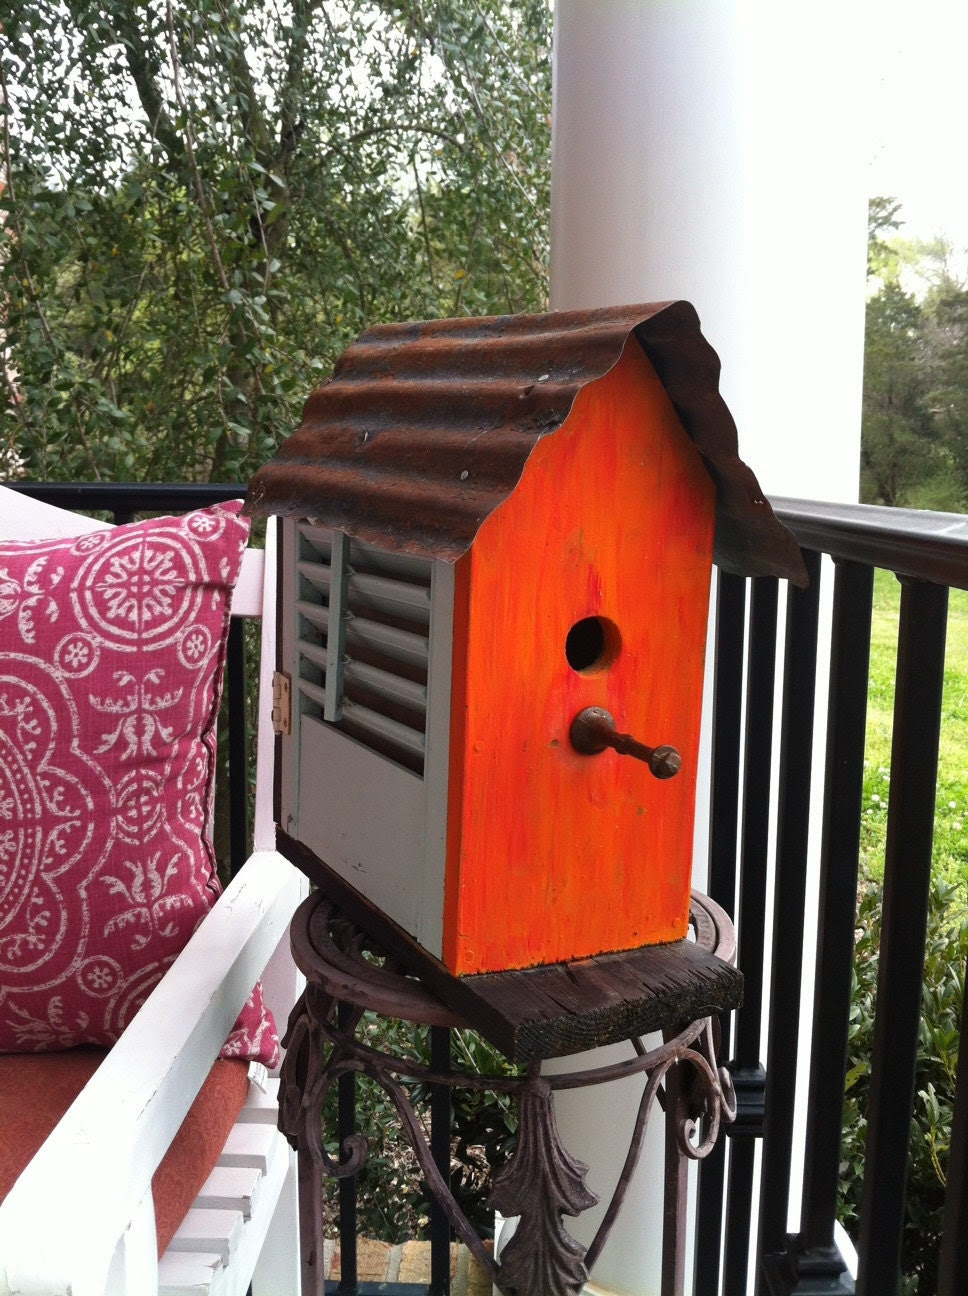 Tangerine Birdhouse with Teal Shutters Upcycled Recycled Shabby Folk Art Wood